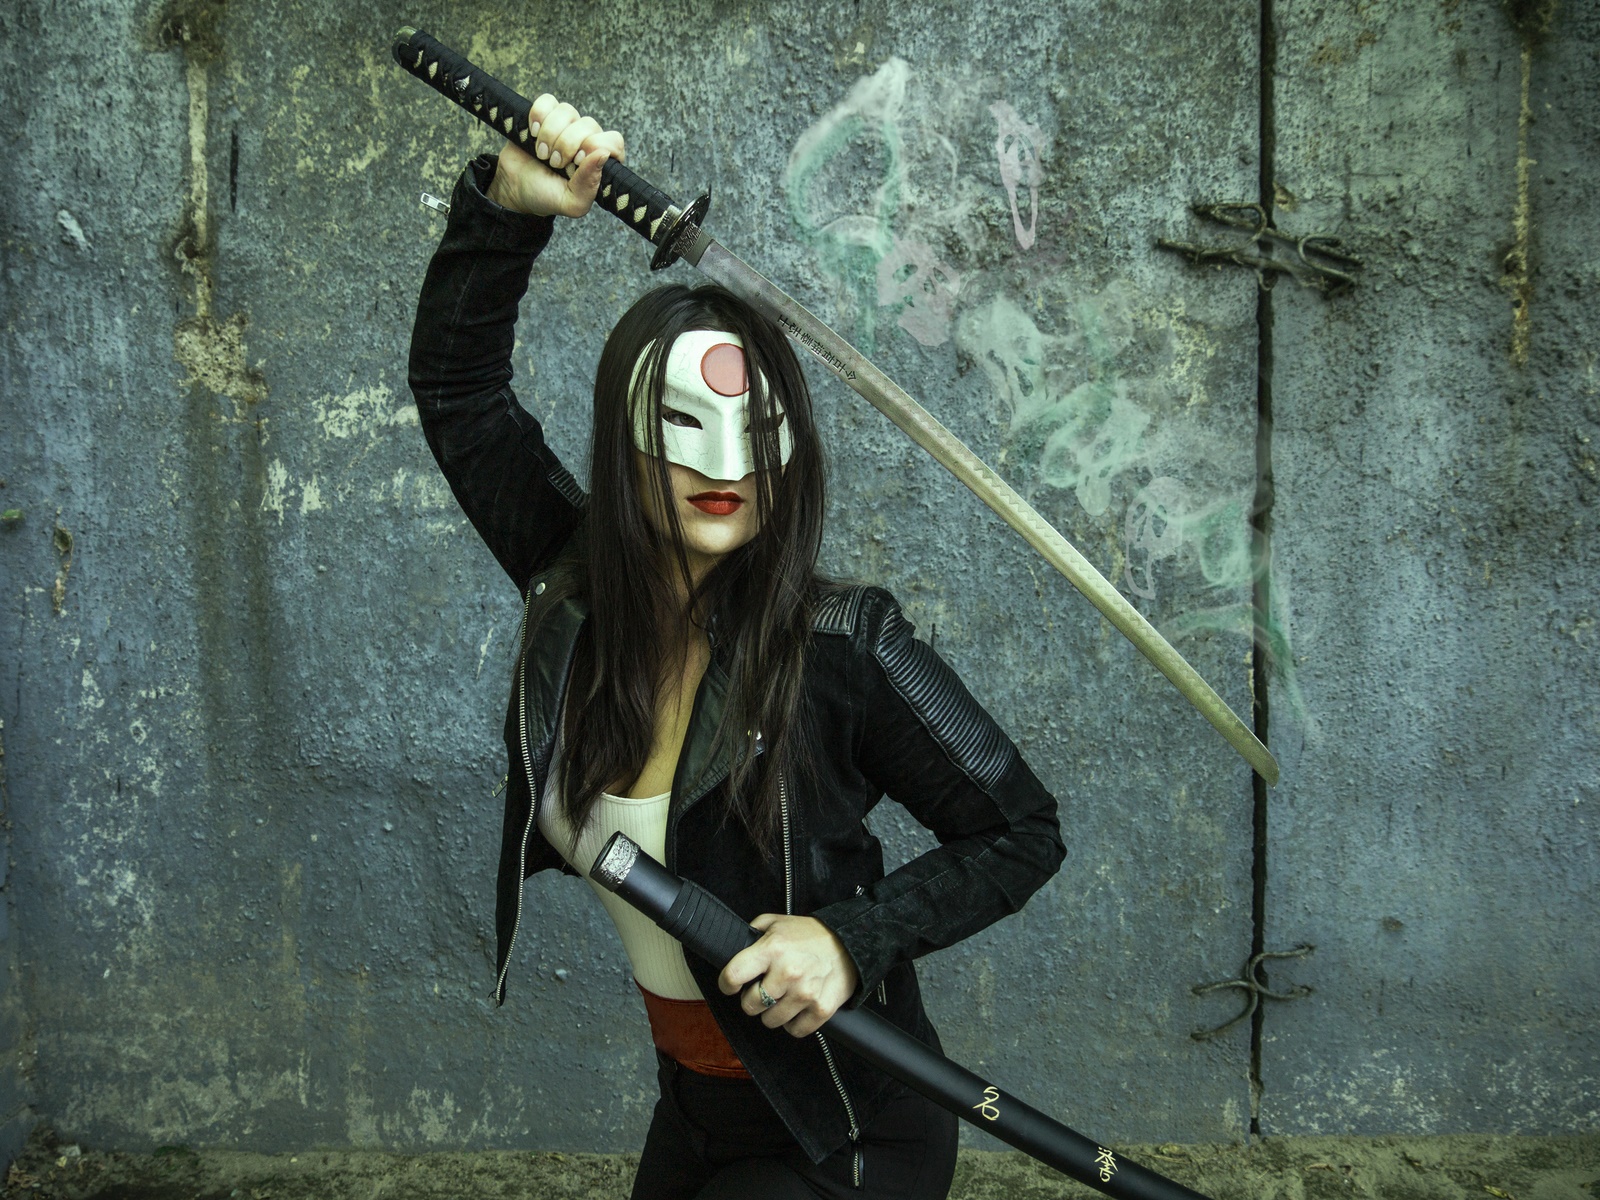 3D Printed Katana Mask for Suicide Squad Cosplay